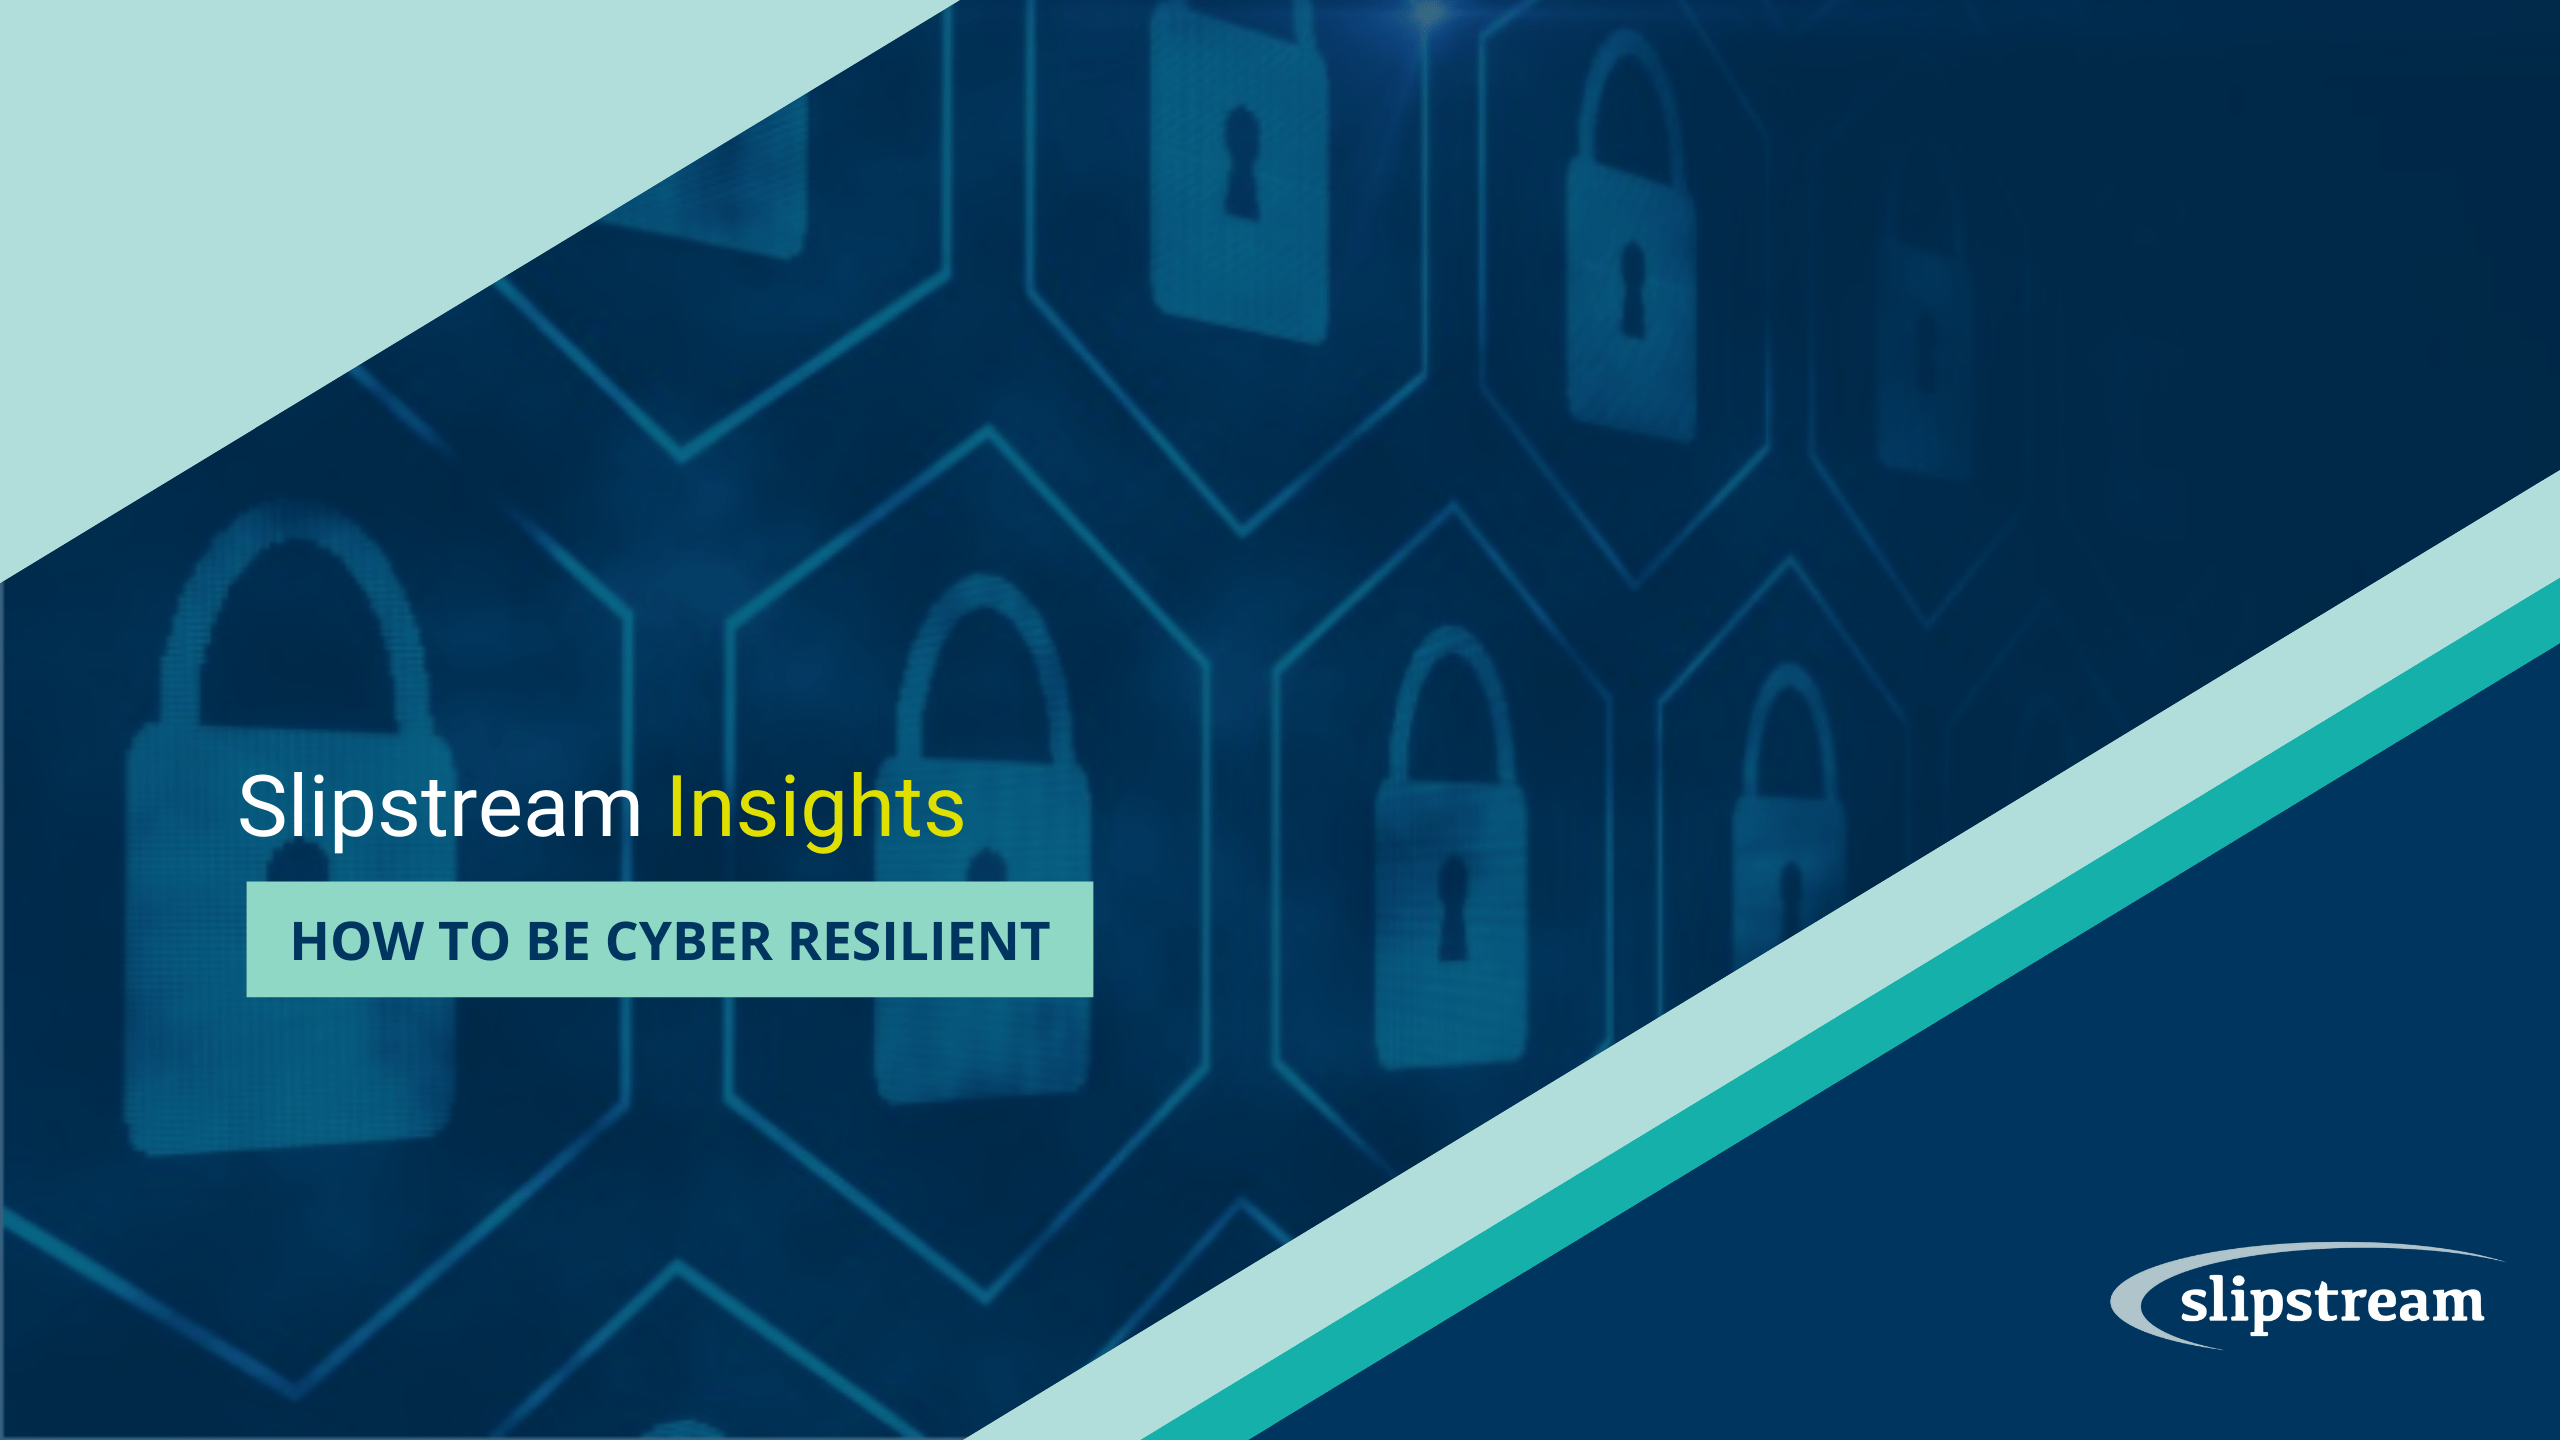 How to Be Cyber Resilient